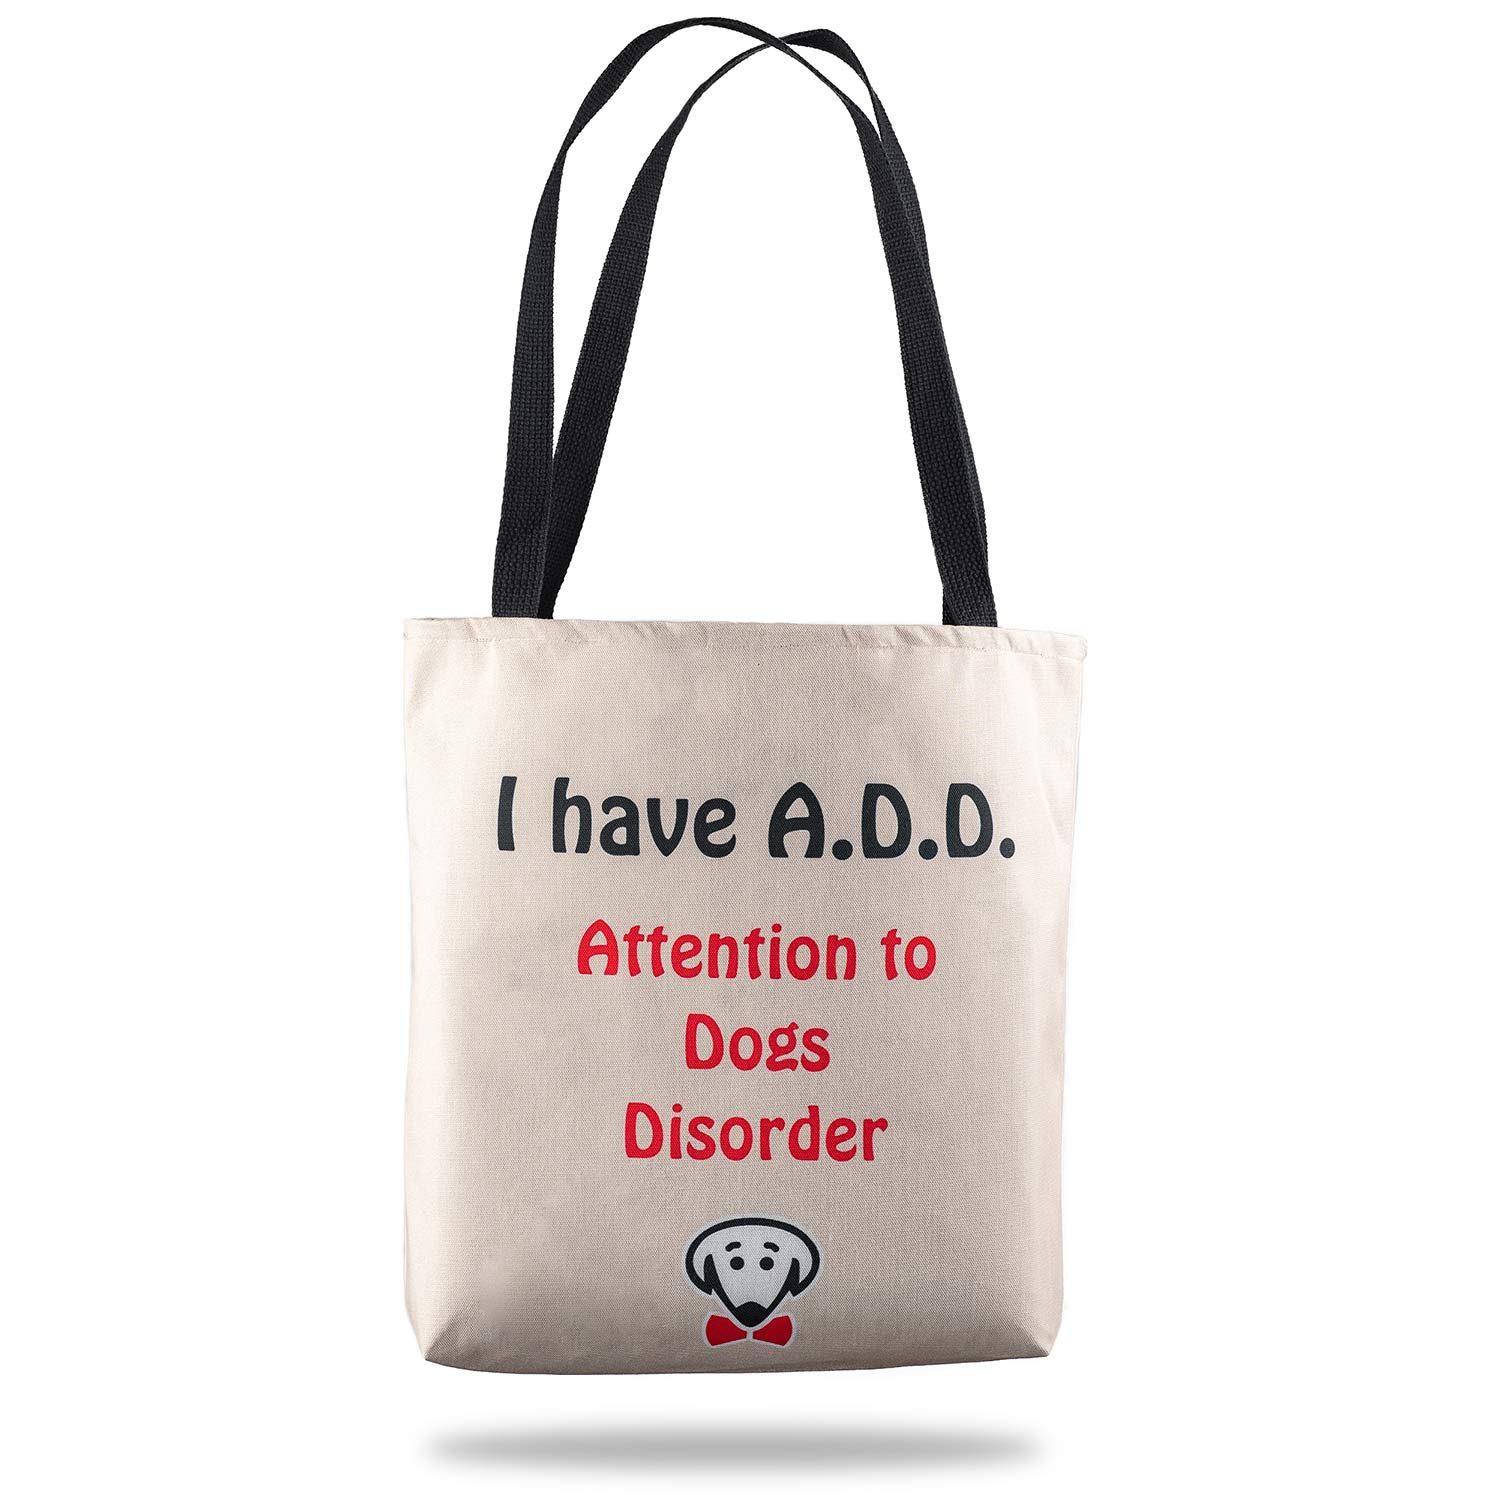 'A.D.D.' Tote by Beau Tyler in tan